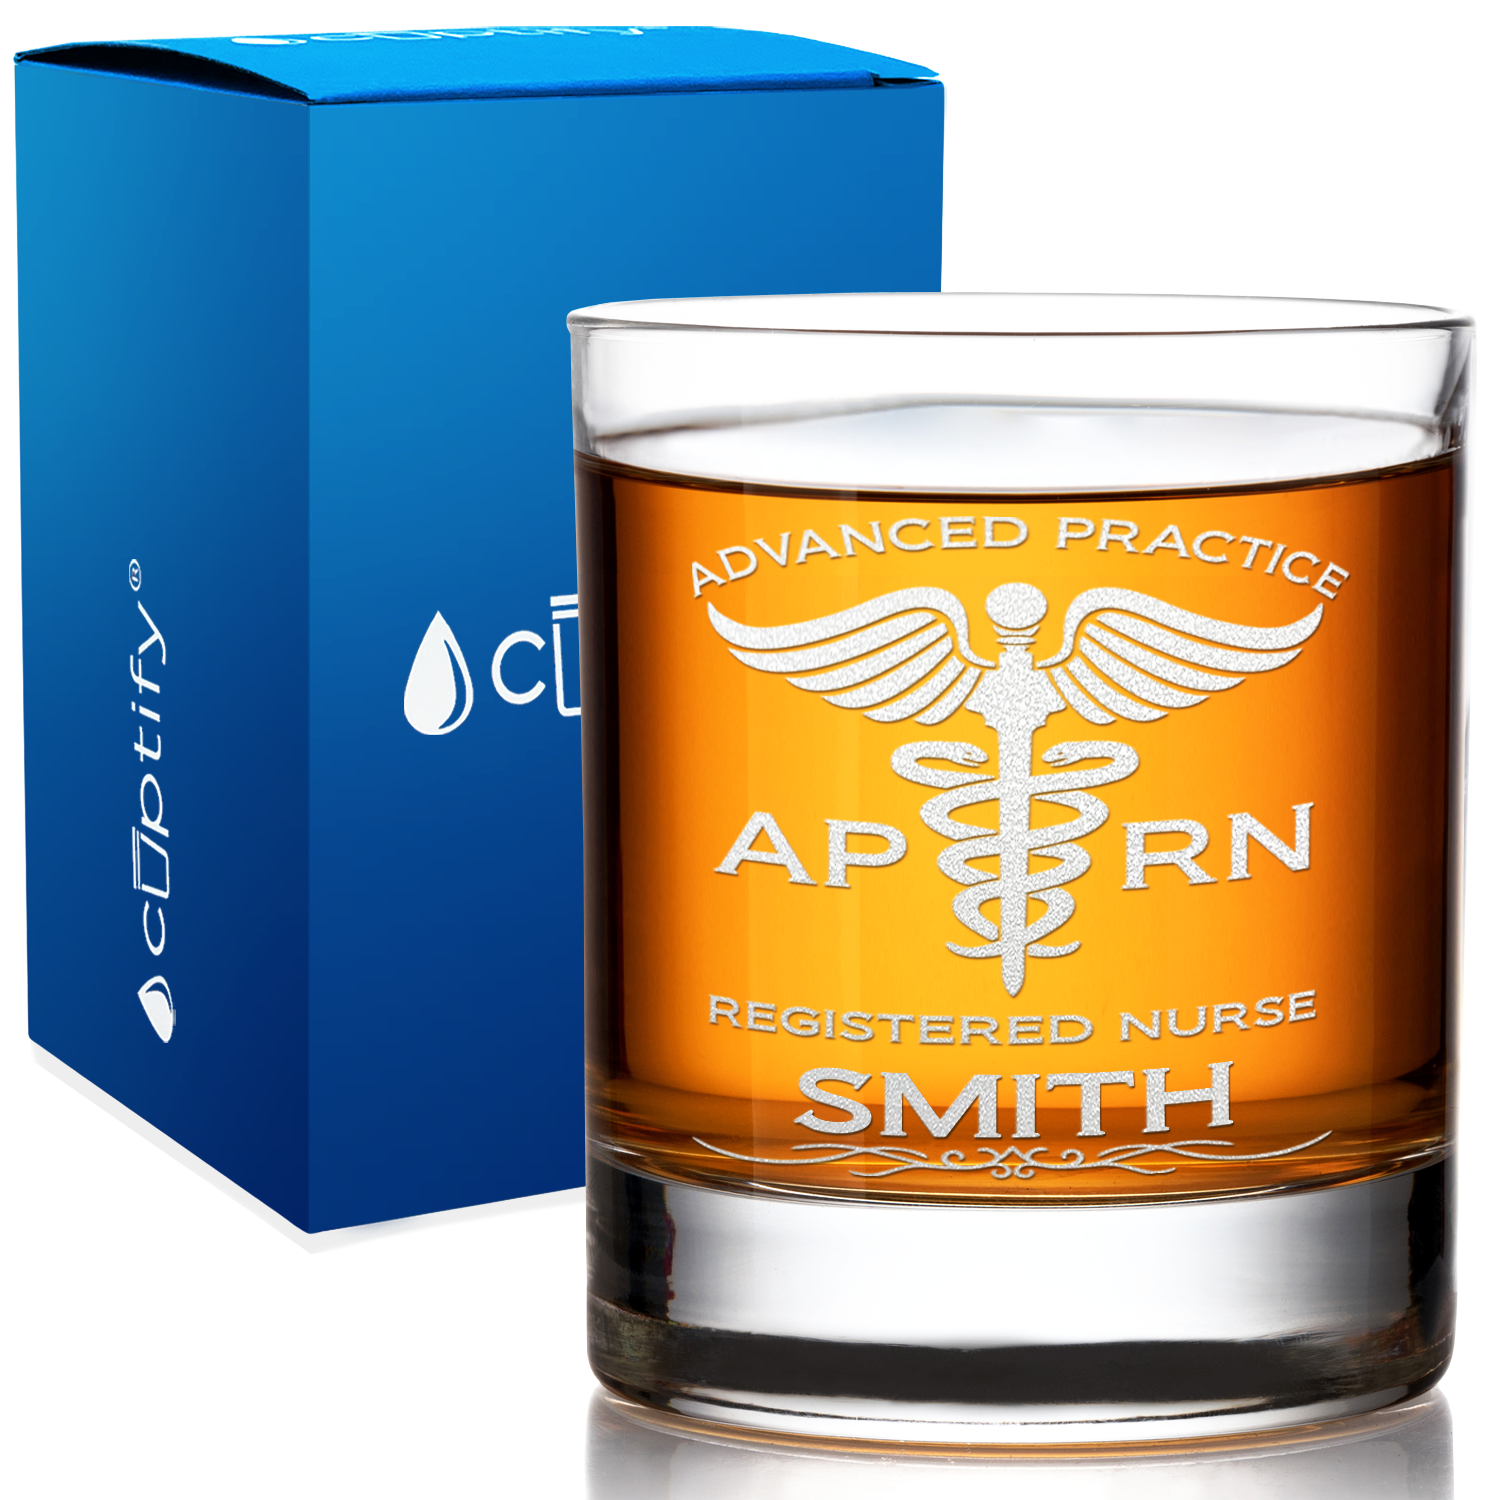 Personalized APRN Advanced Practice Registered Nurse on 10.25oz Whiskey Glass